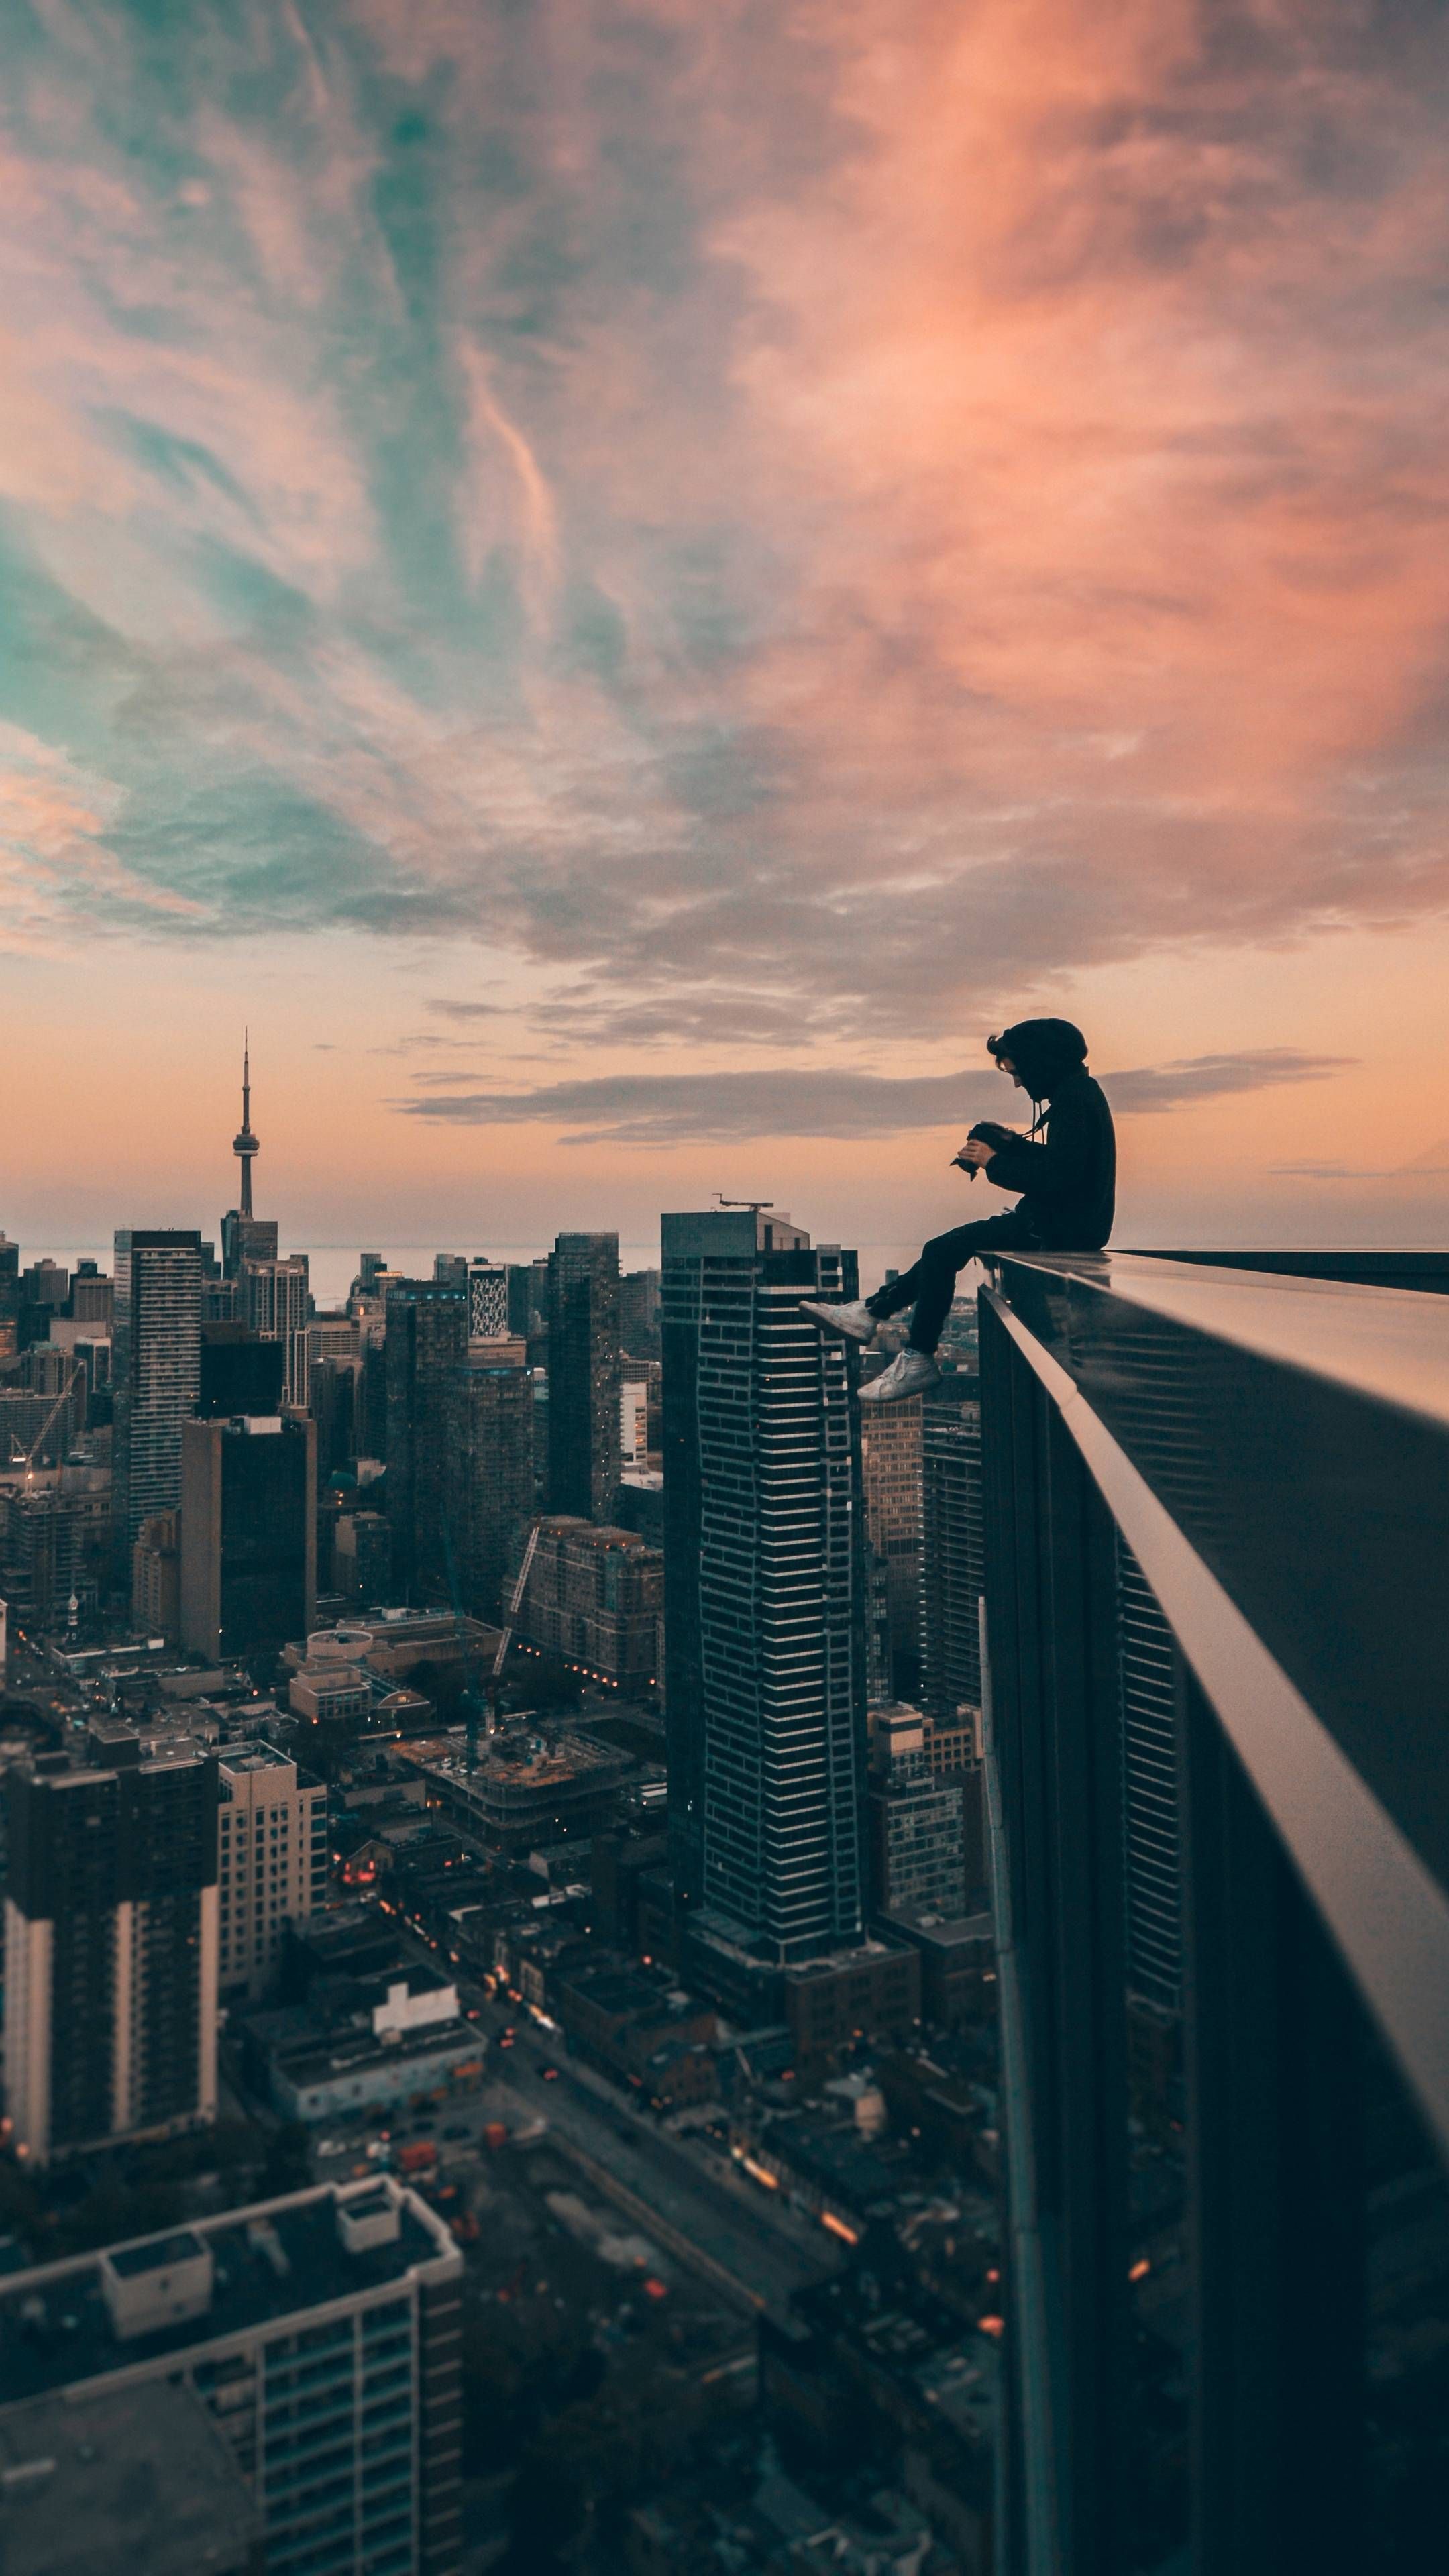 A Man Sitting on Top of a Building. Phone wallpaper for men, Anime scenery wallpaper, Anime scenery